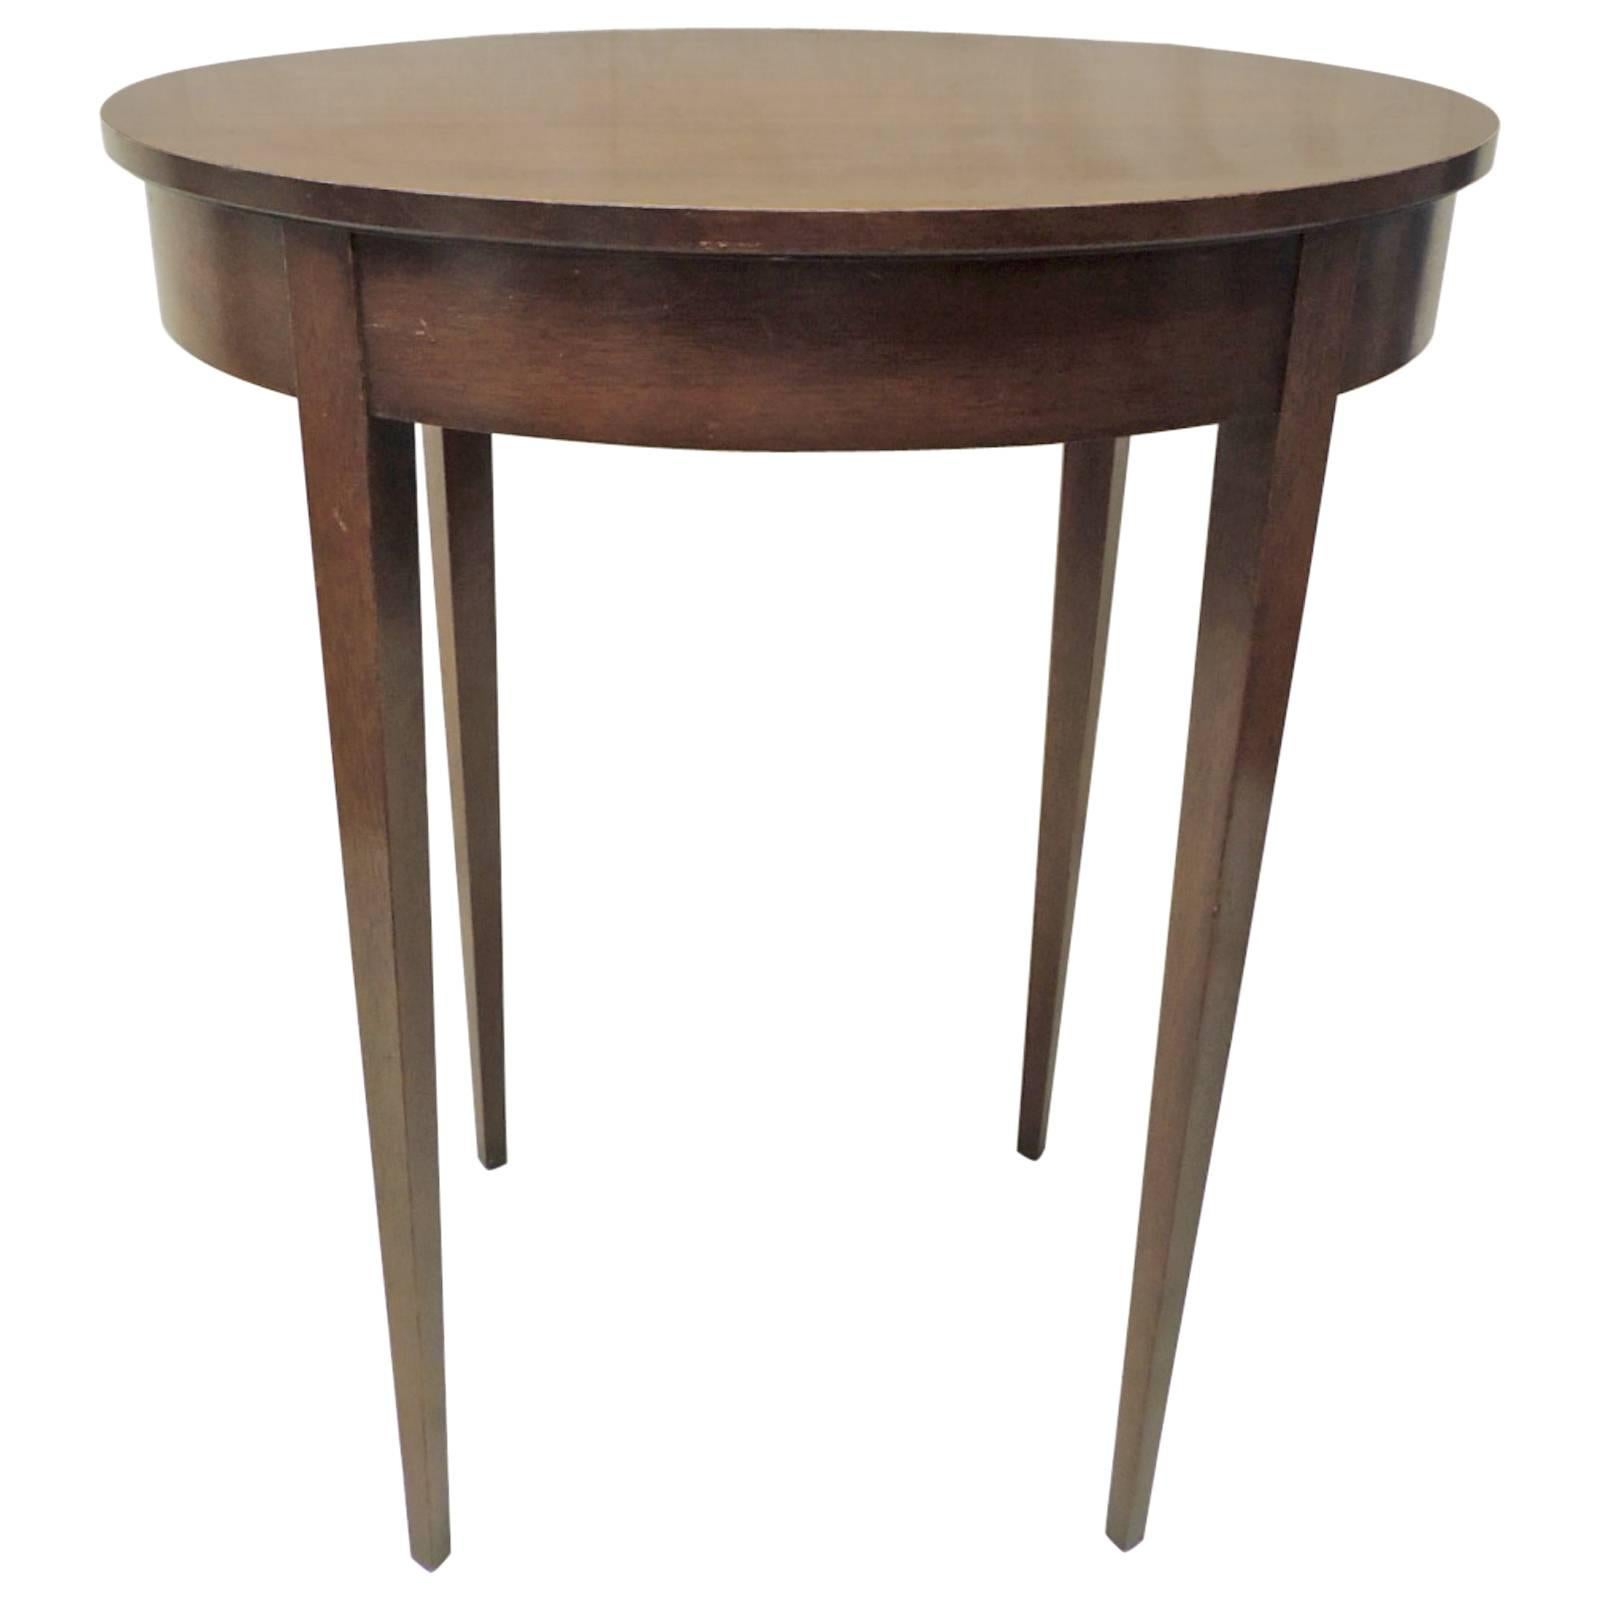 Vintage Oval Wood Side Table with Square Tapered Legs